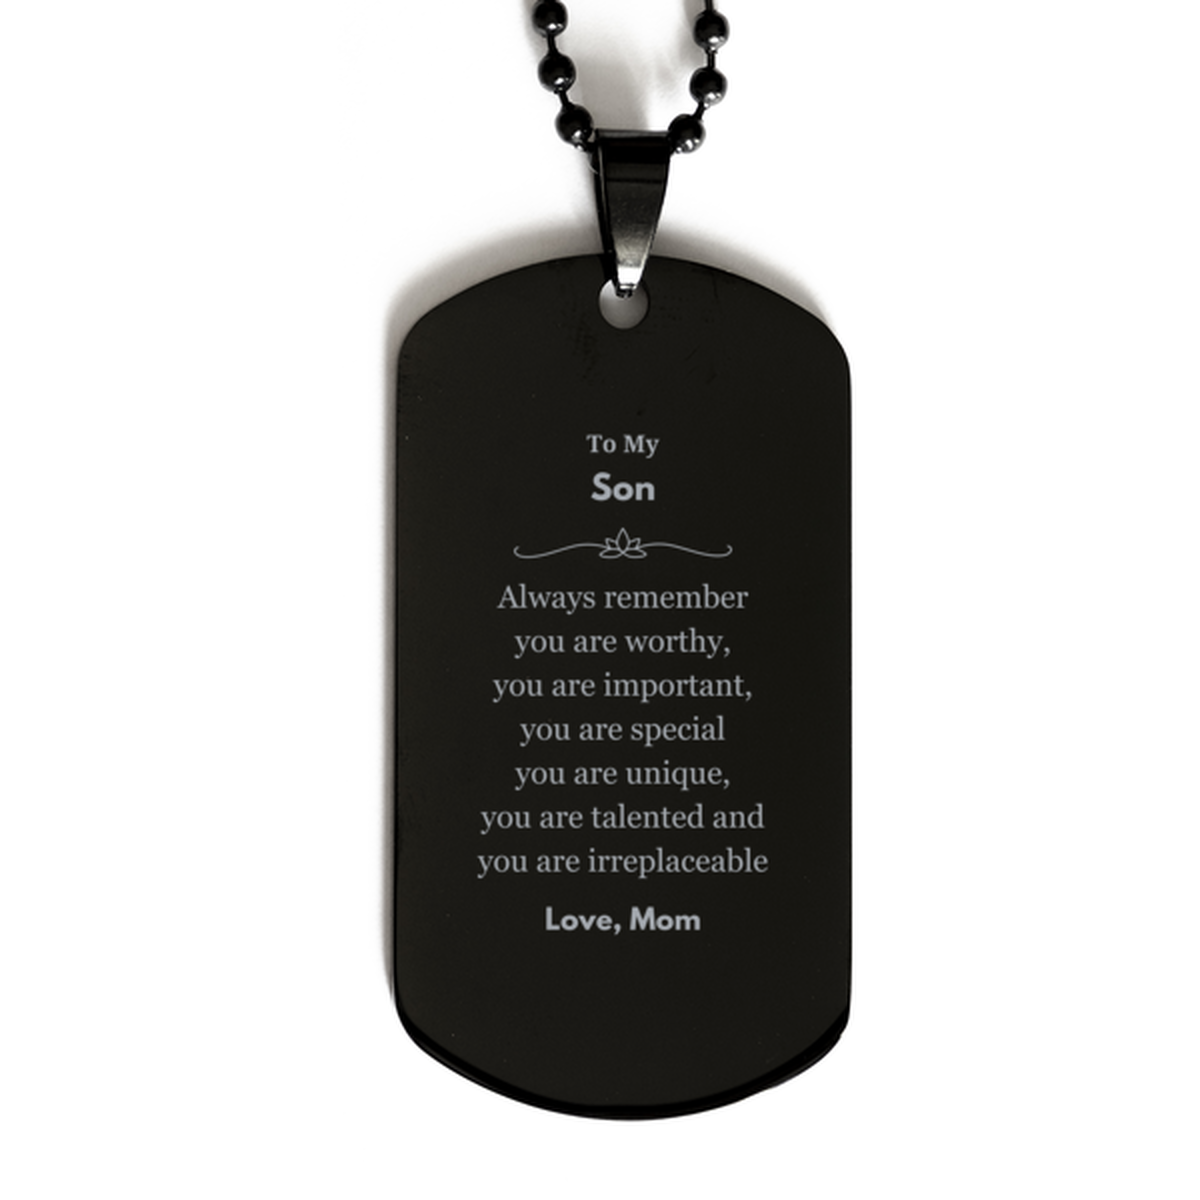 Son Birthday Gifts from Mom, Inspirational Black Dog Tag for Son Christmas Graduation Gifts for Son Always remember you are worthy, you are important. Love, Mom